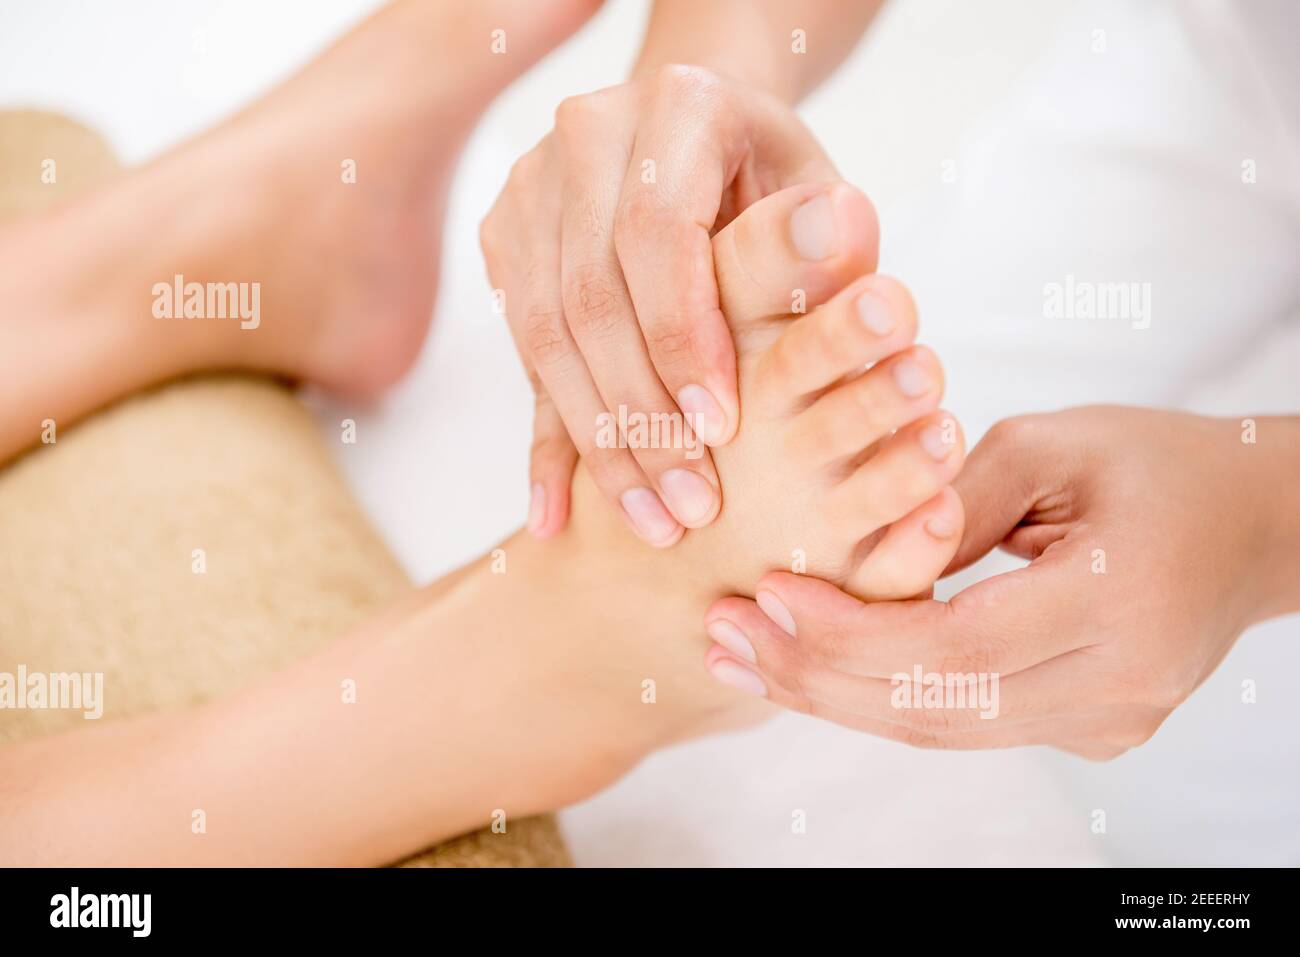 Professional therapist giving relaxing traditional thai reflexology foot massage to a woman in spa Stock Photo